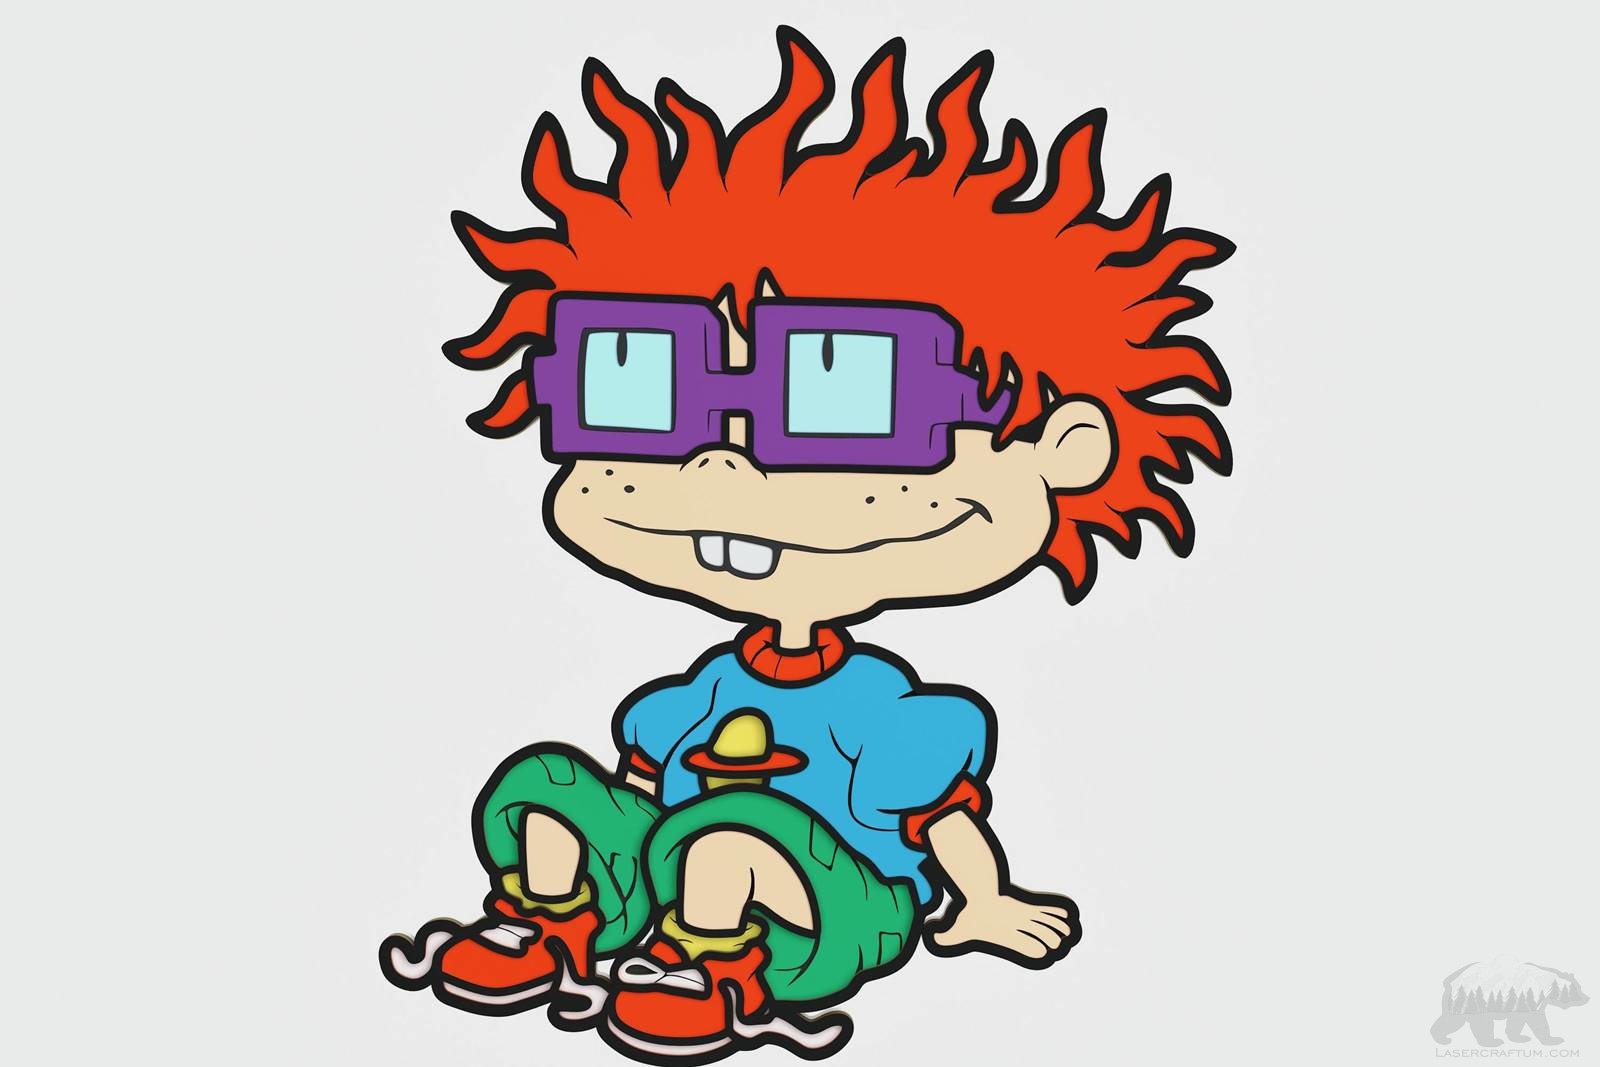 Chuckie Finster (Rugrats) Layered Design for cutting